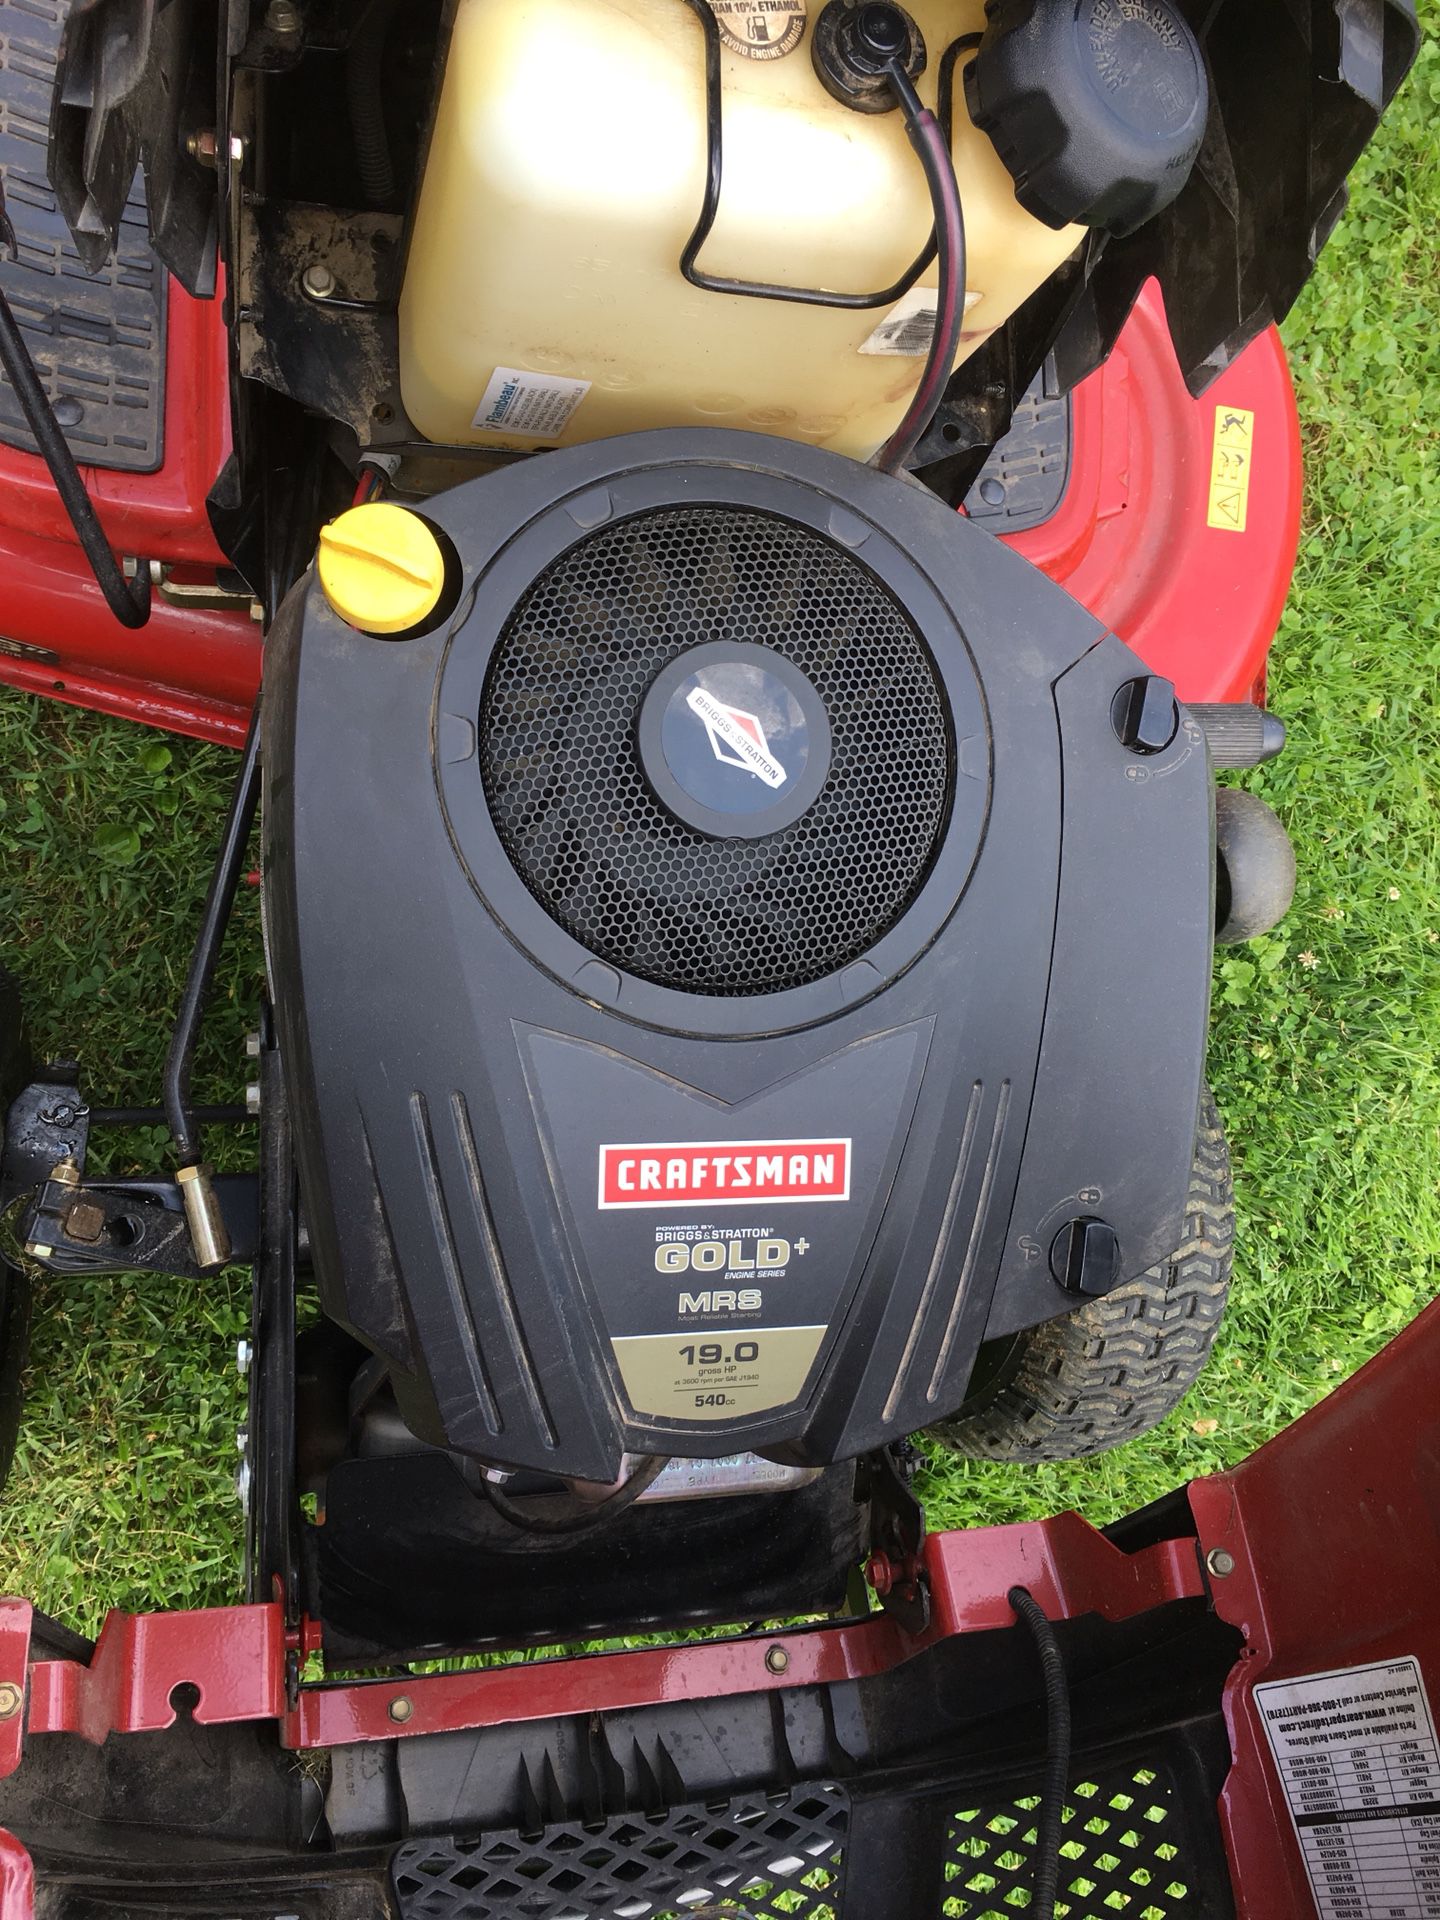 2016 Craftsman T1600 Lawn Tractor For Sale In Ambler Pa Offerup